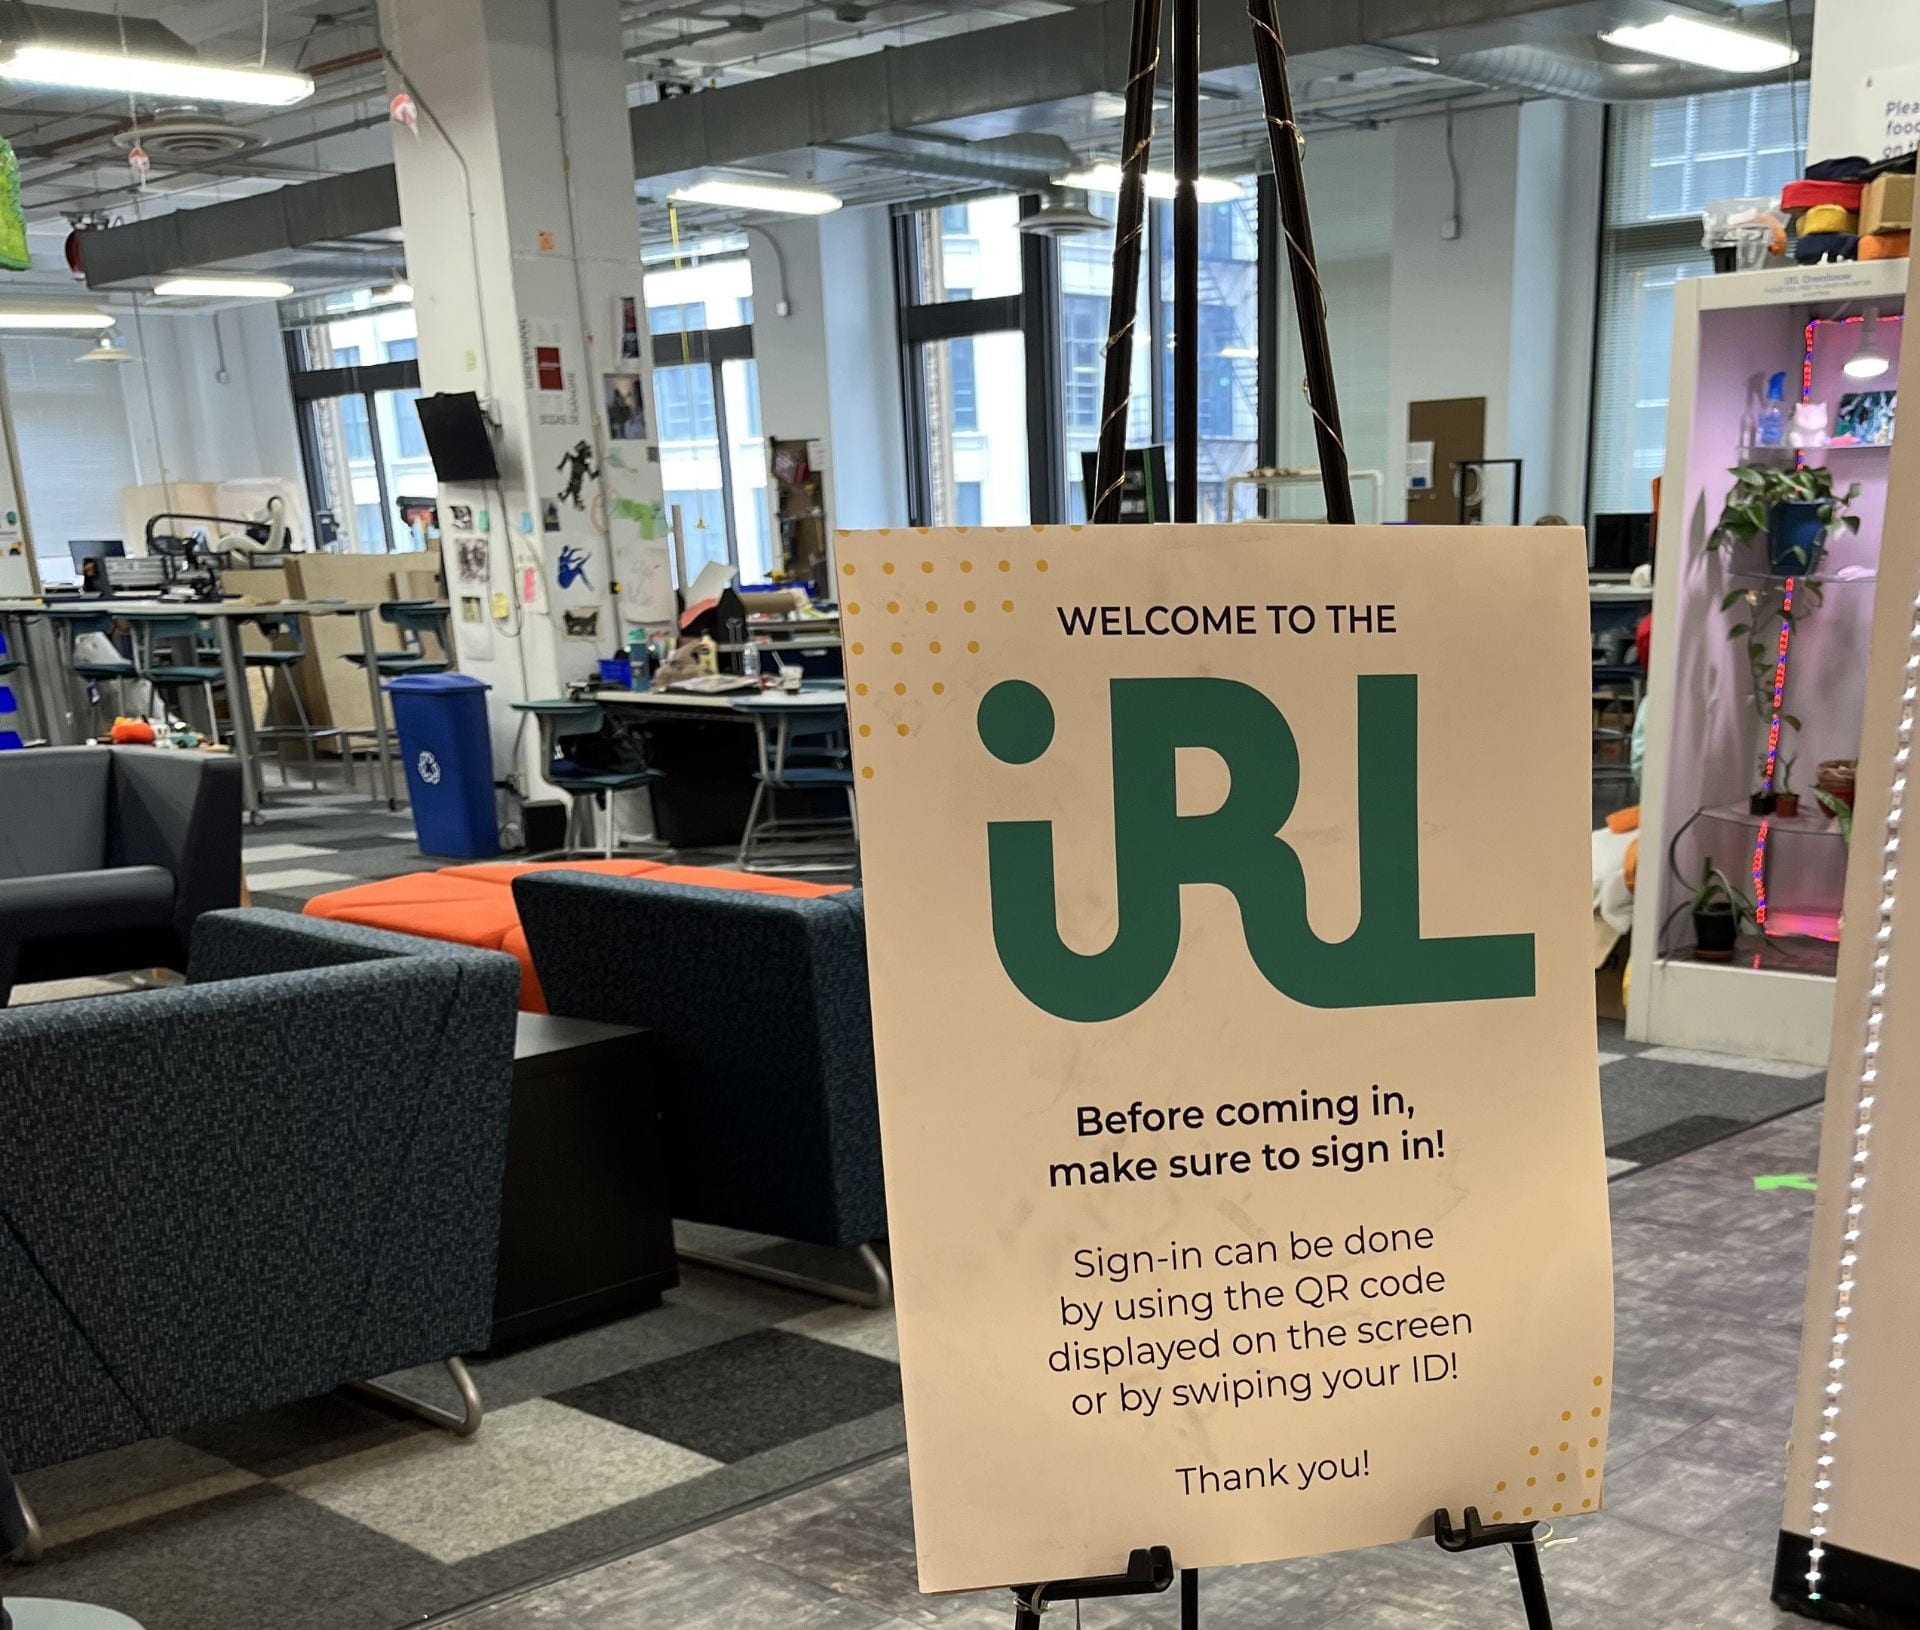 A sign that says “Welcome to IRL” at DePaul’s idea lab, showing comfy chairs, work spaces and the rest of DePaul’s loop campus space.